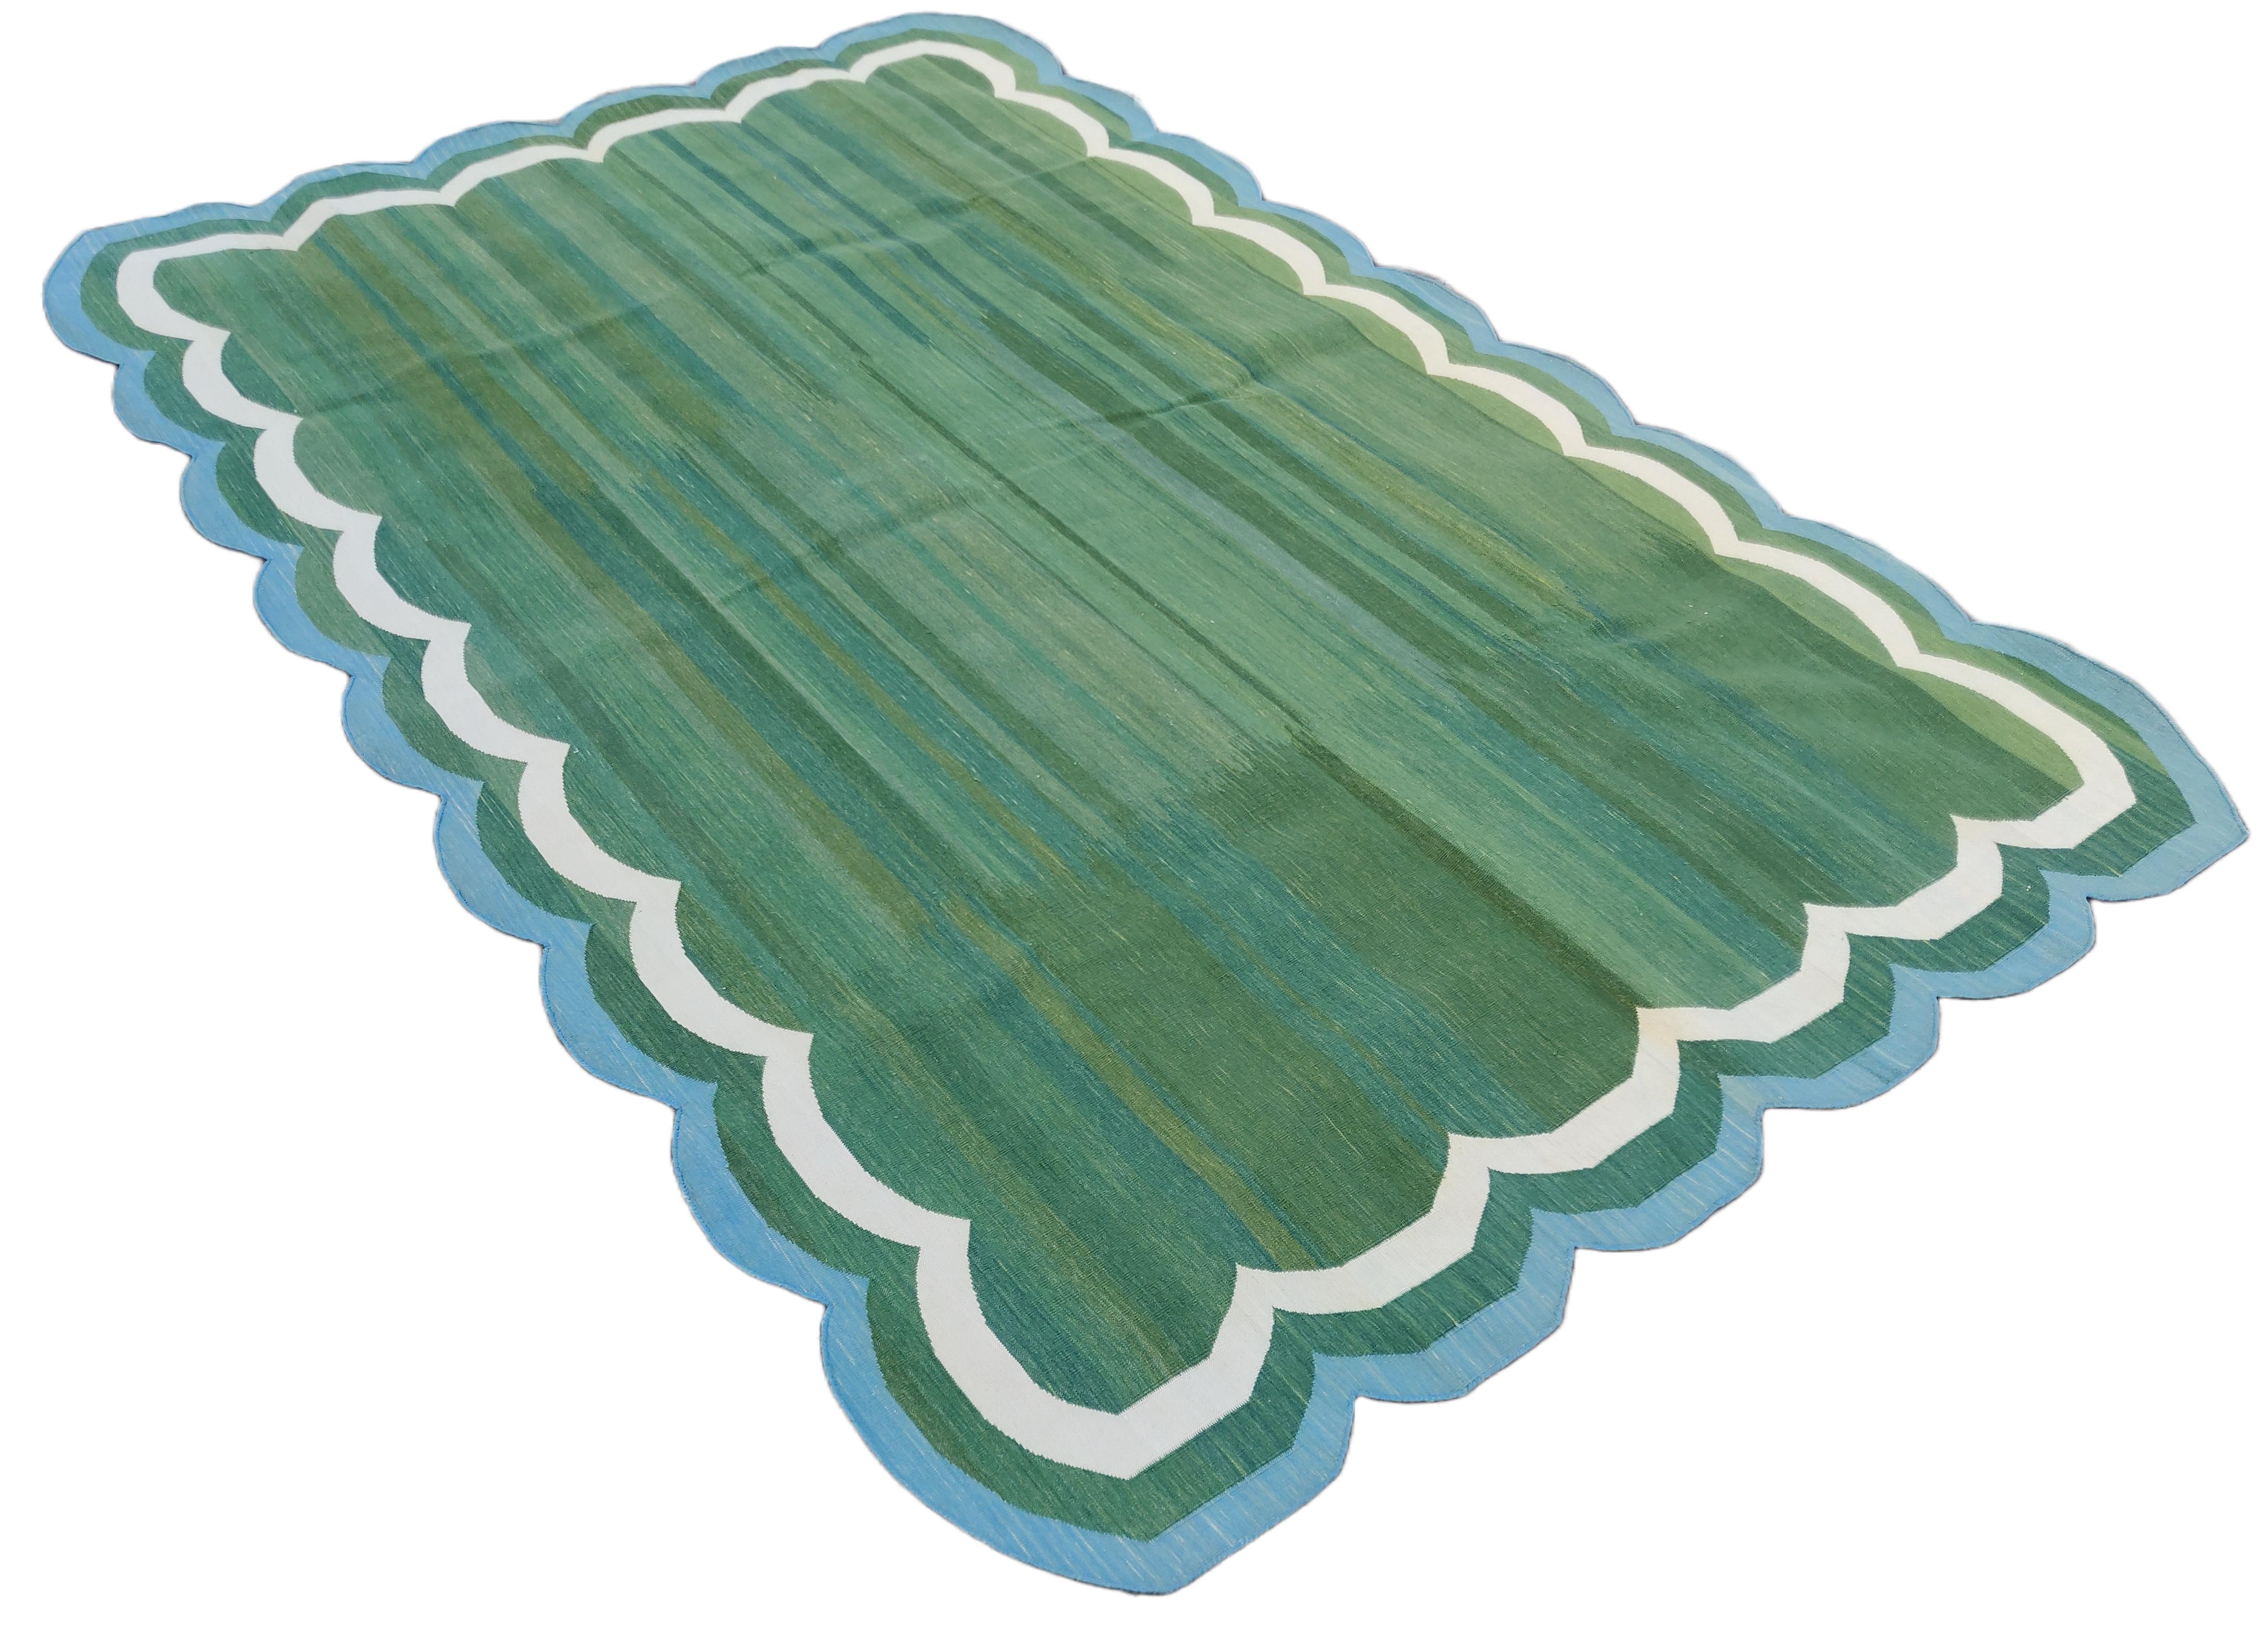 Hand-Woven Handmade Cotton Area Flat Weave Rug, Green And Blue Scalloped Indian Dhurrie Rug For Sale